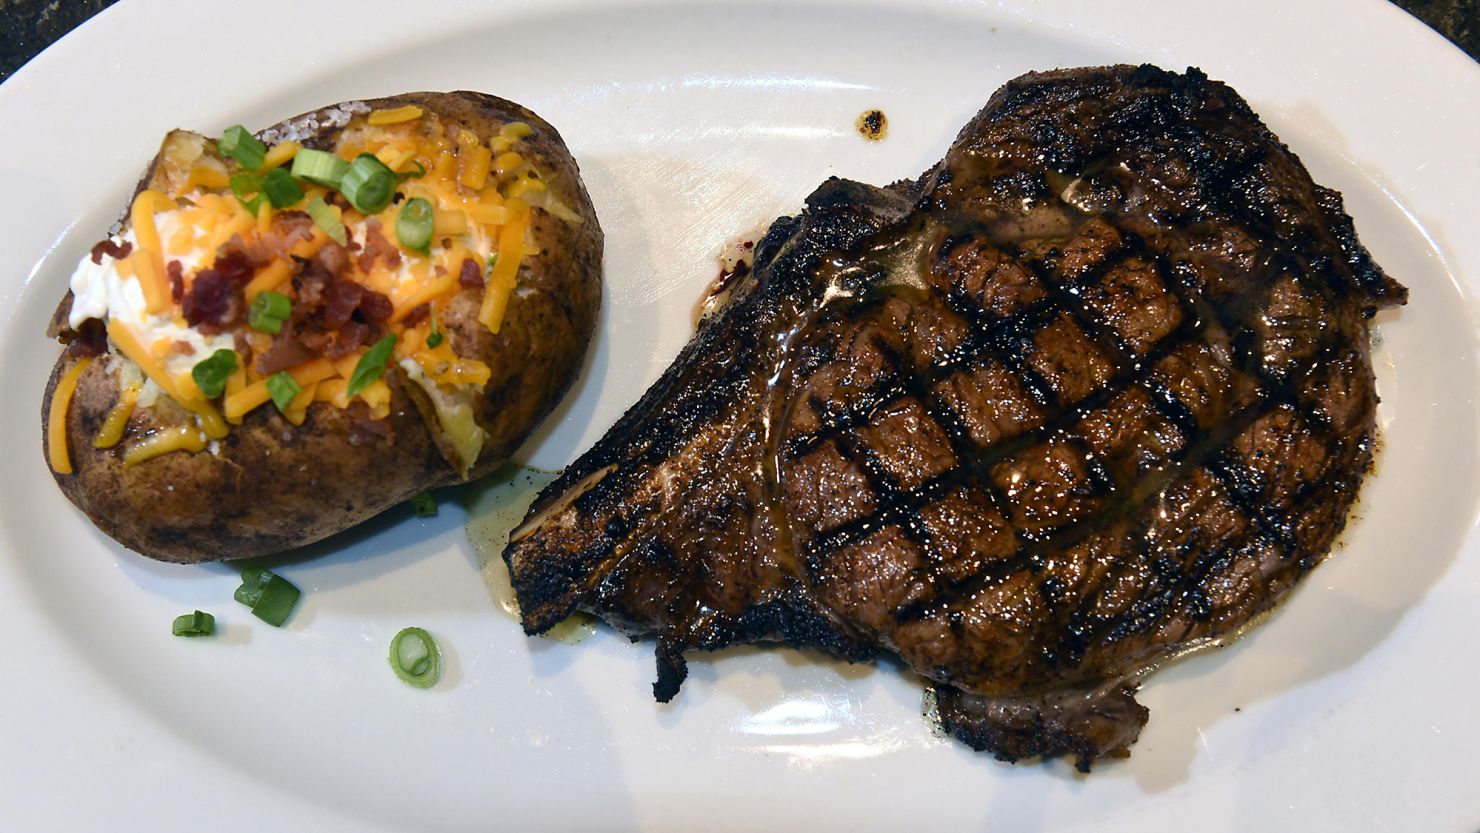 Steak and a loaded potato at LongHorn Steakhouse.